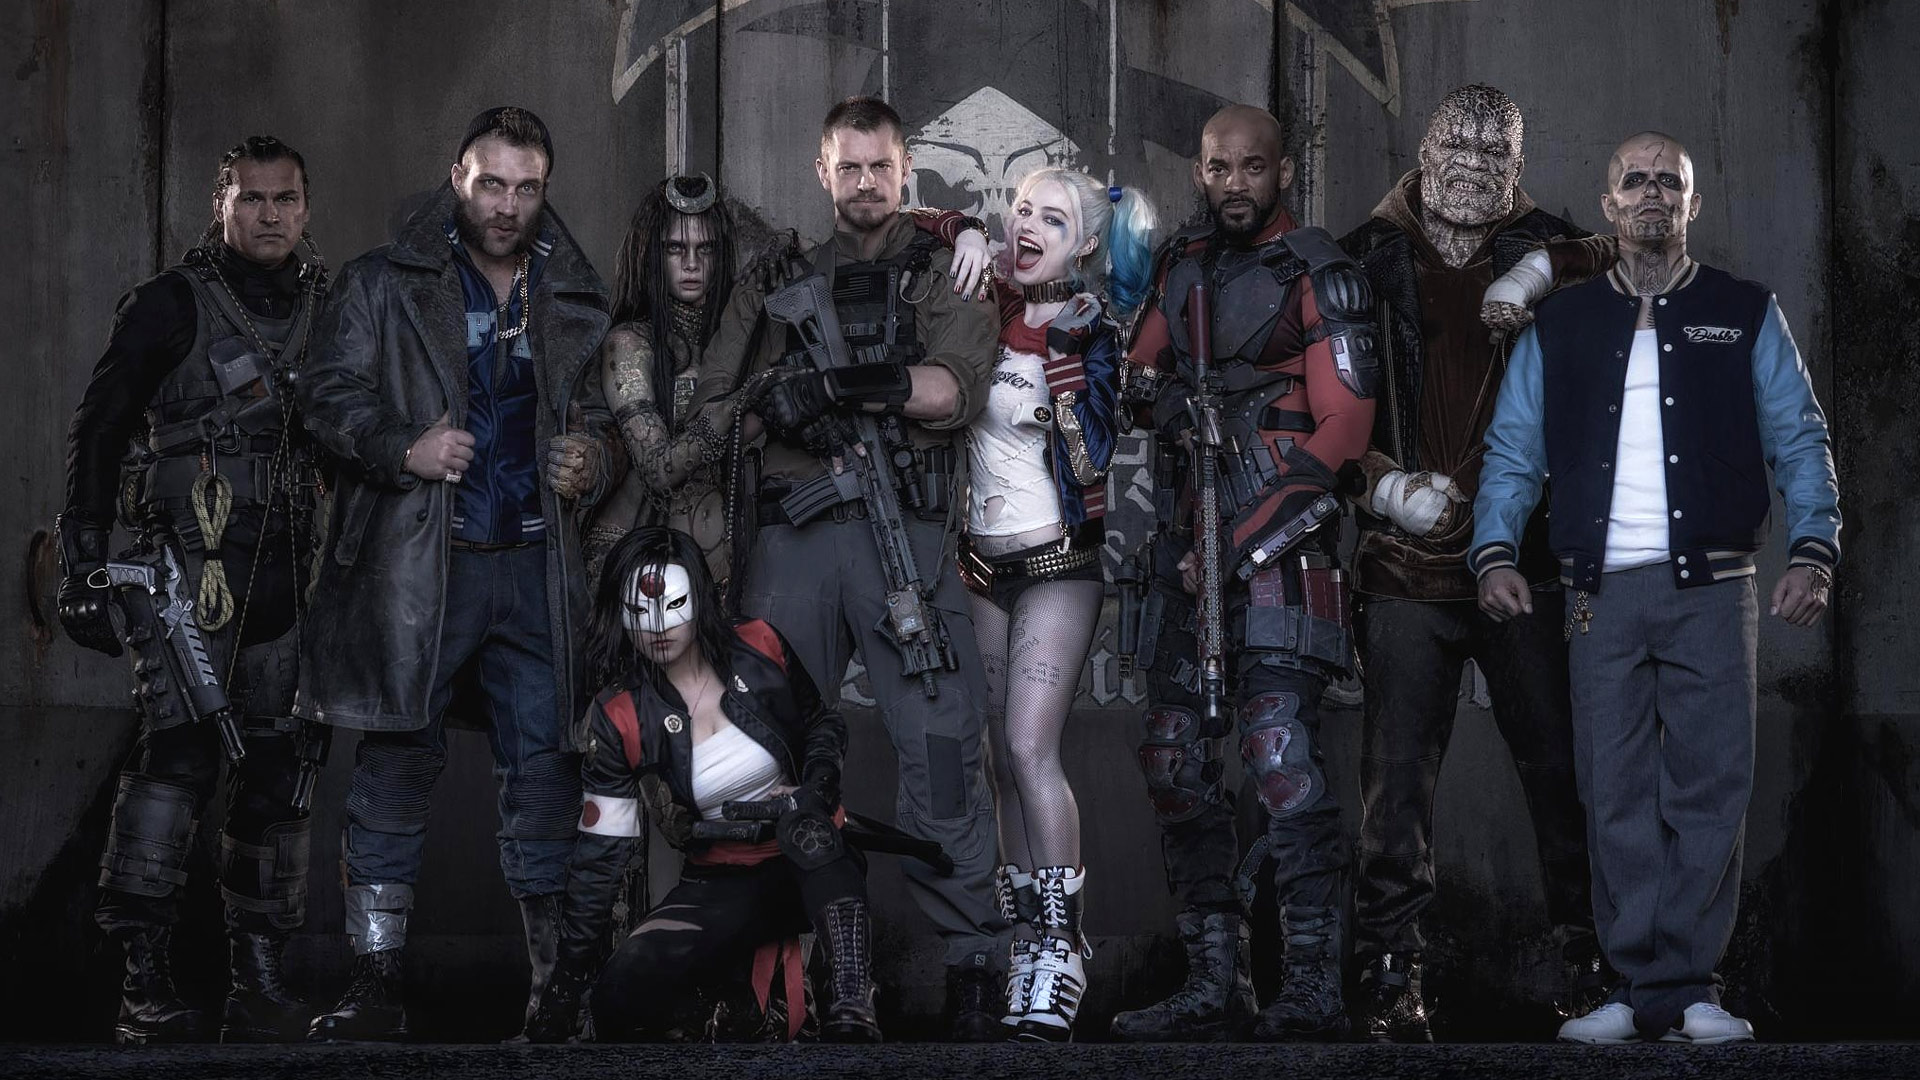 Cool Suicide Squad Wallpapers